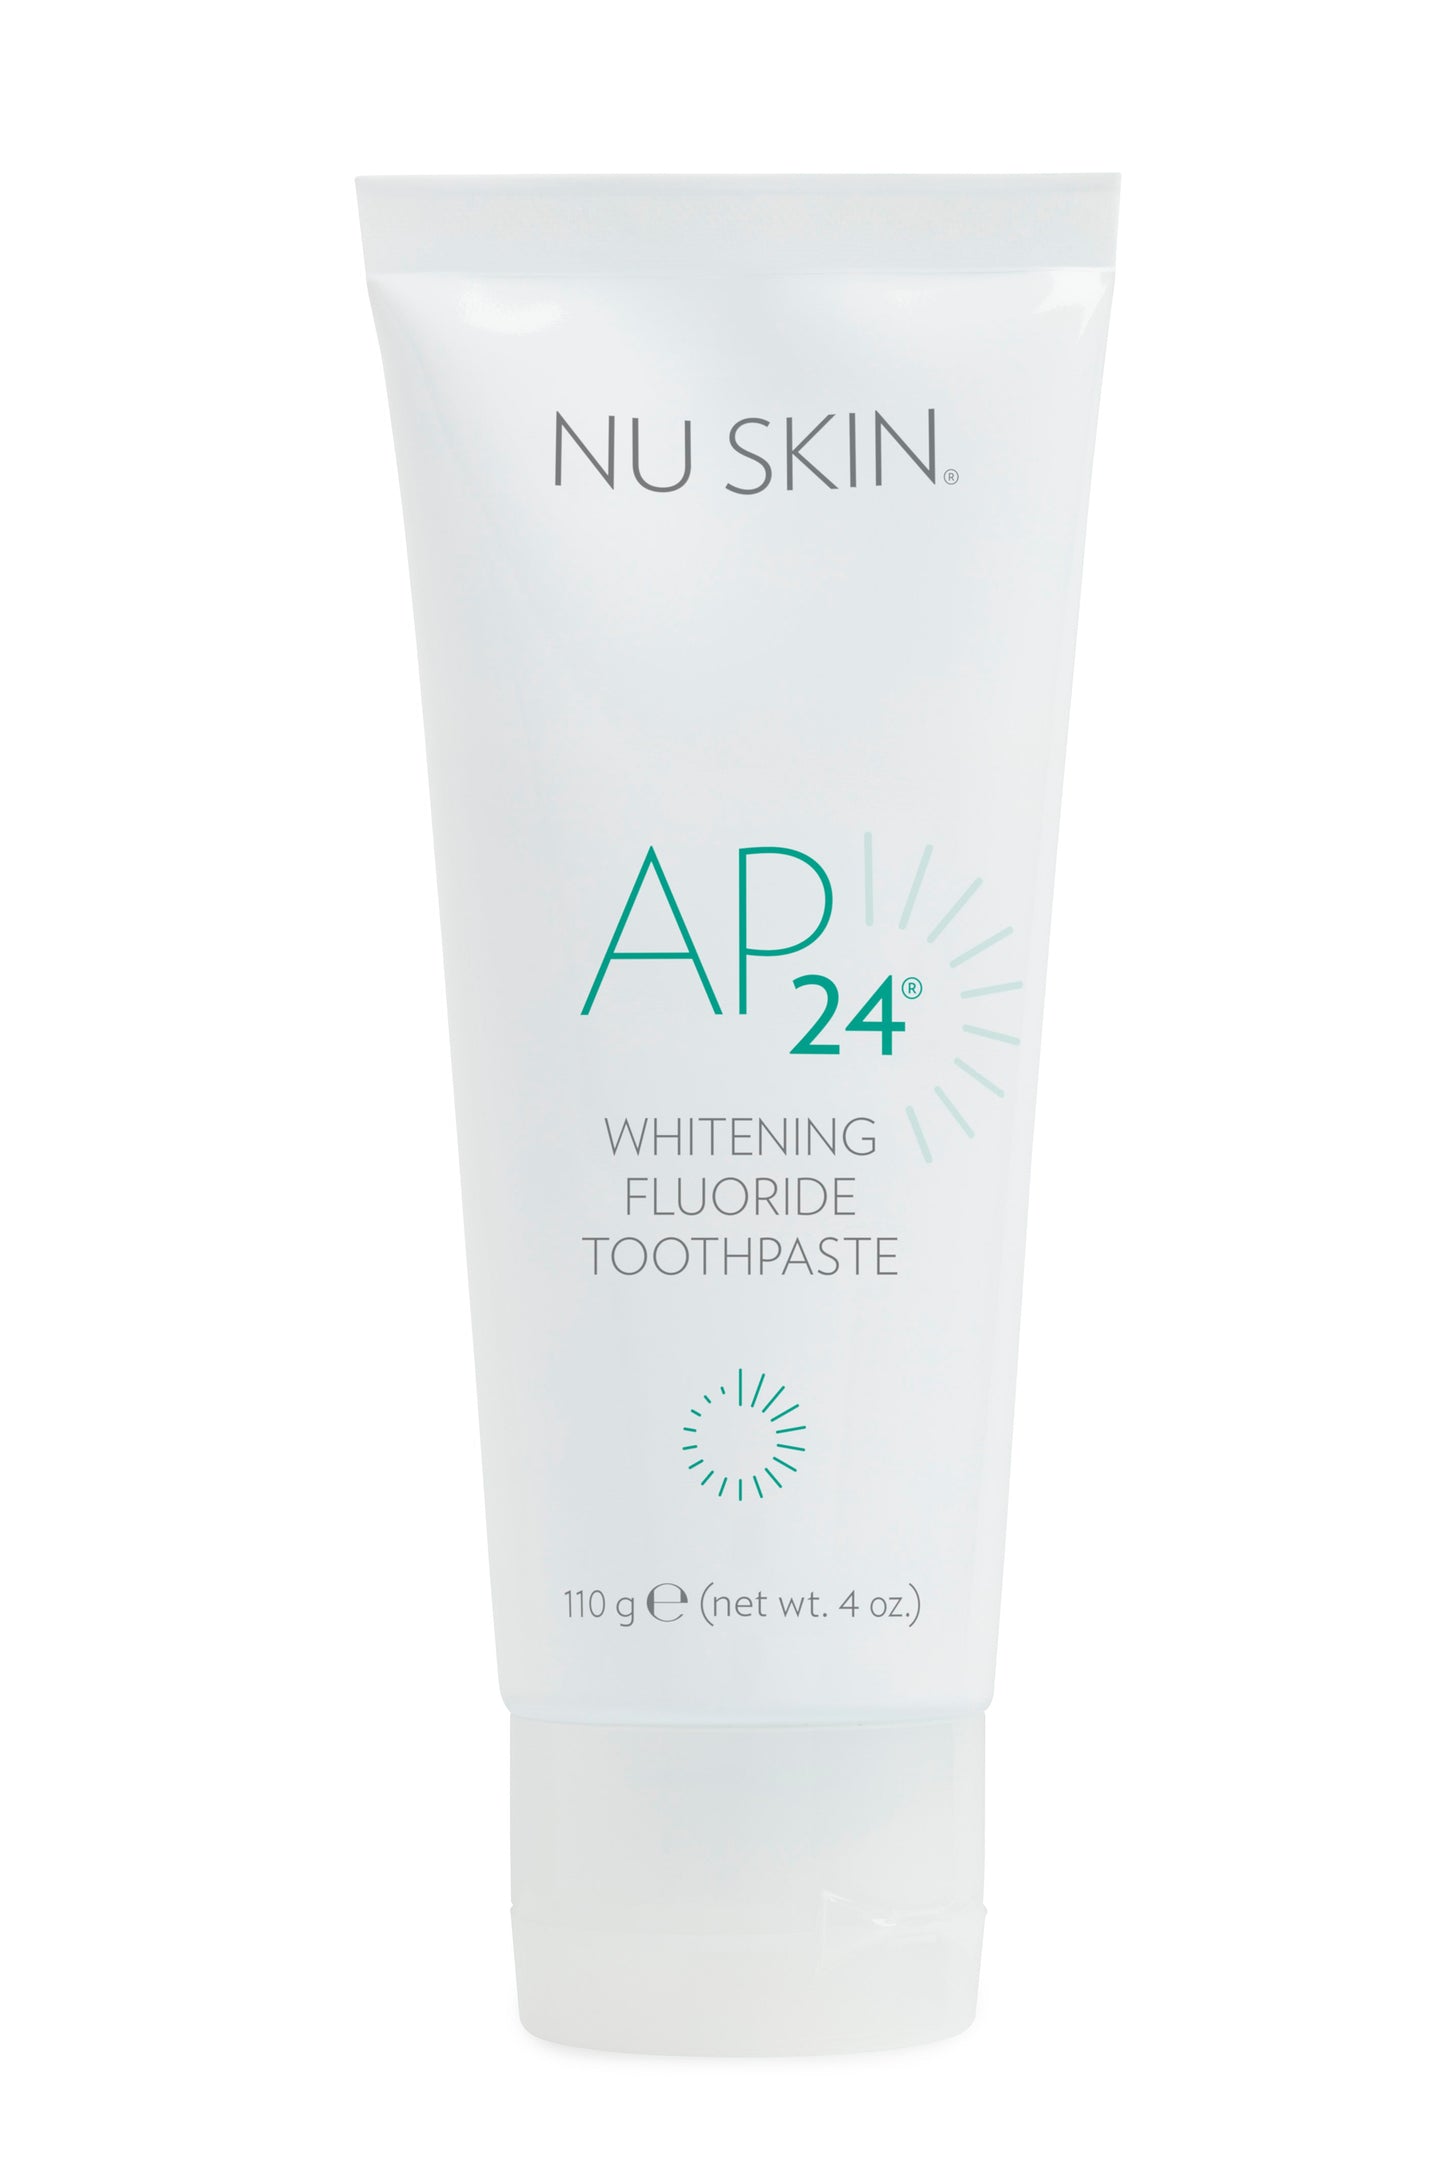 AP 24 Whitening Fluoride Toothpaste - Nu-business.life